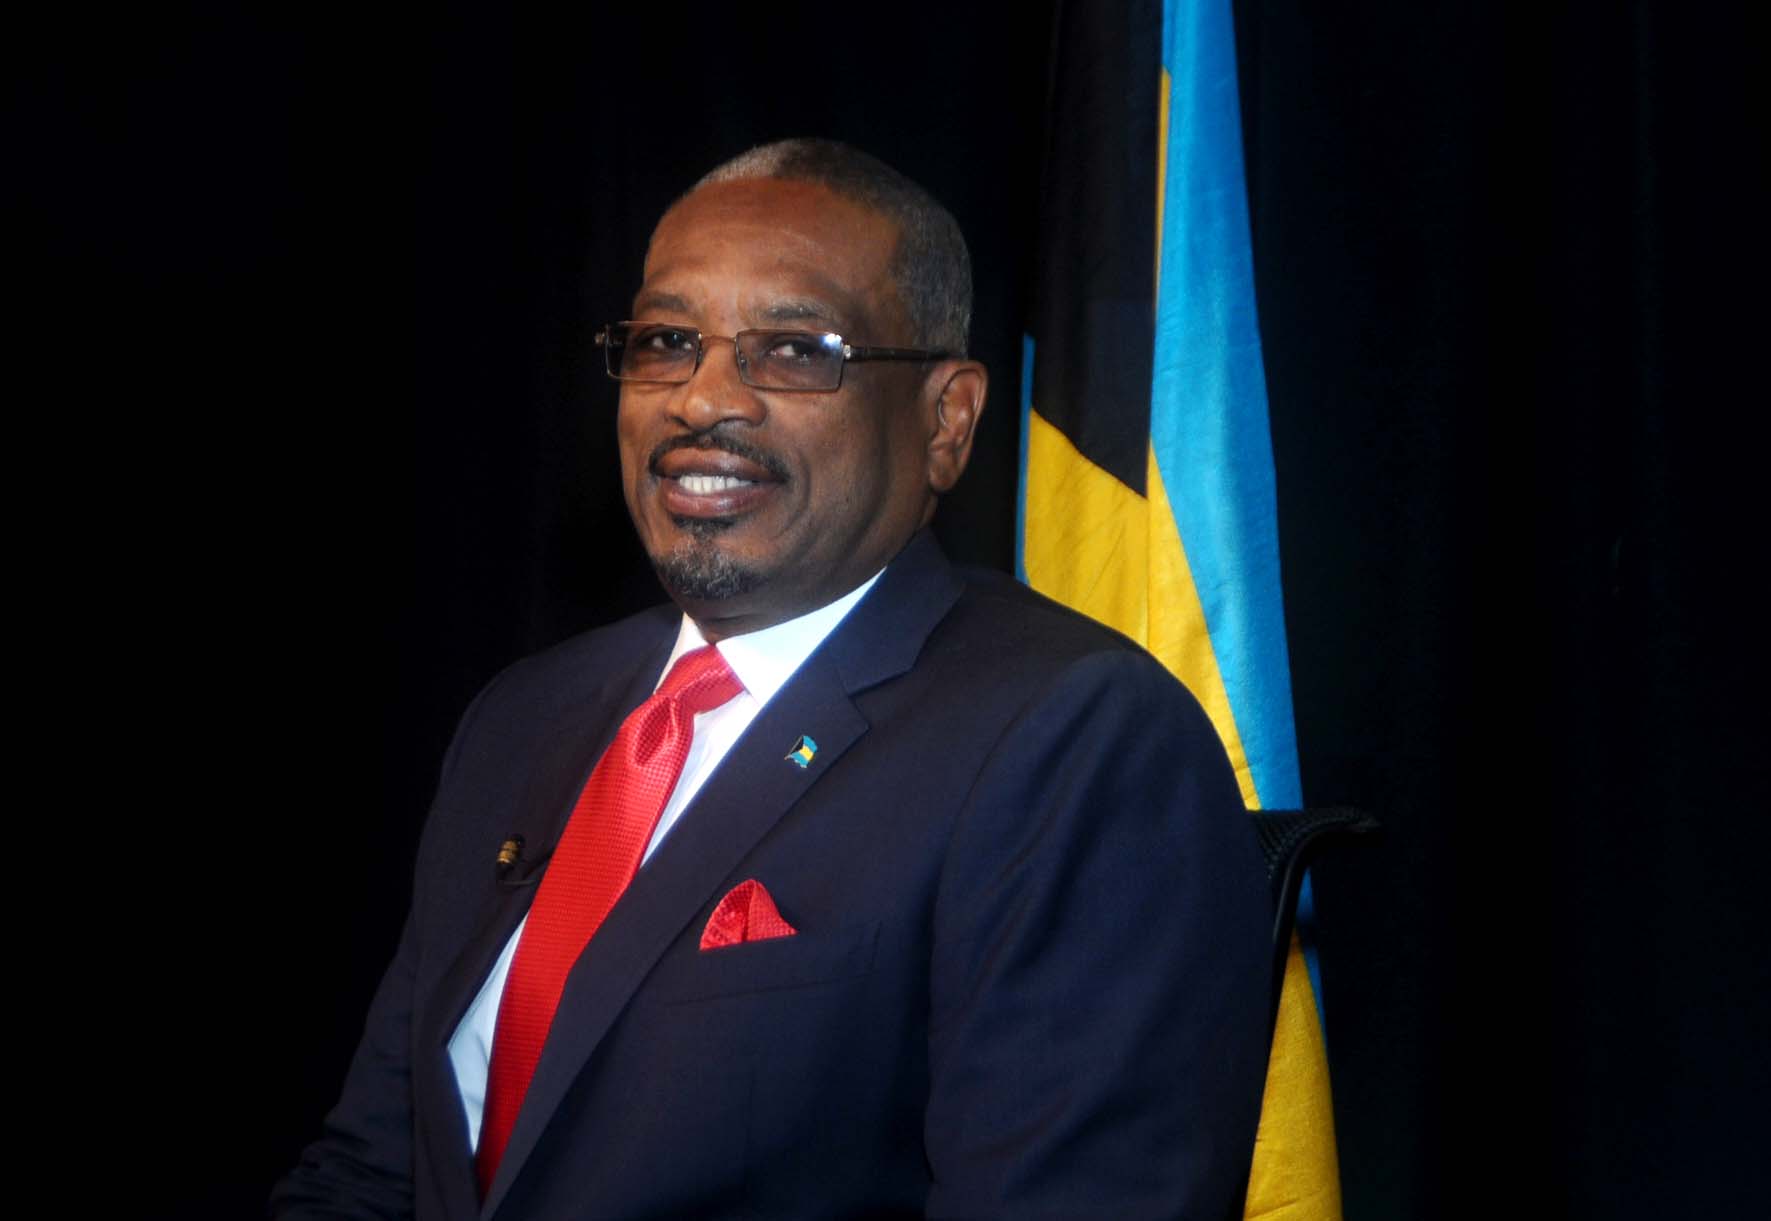 PM HARRIS CONGRATULATES THE NEW PRIME MINISTER OF THE BAHAMAS, DR